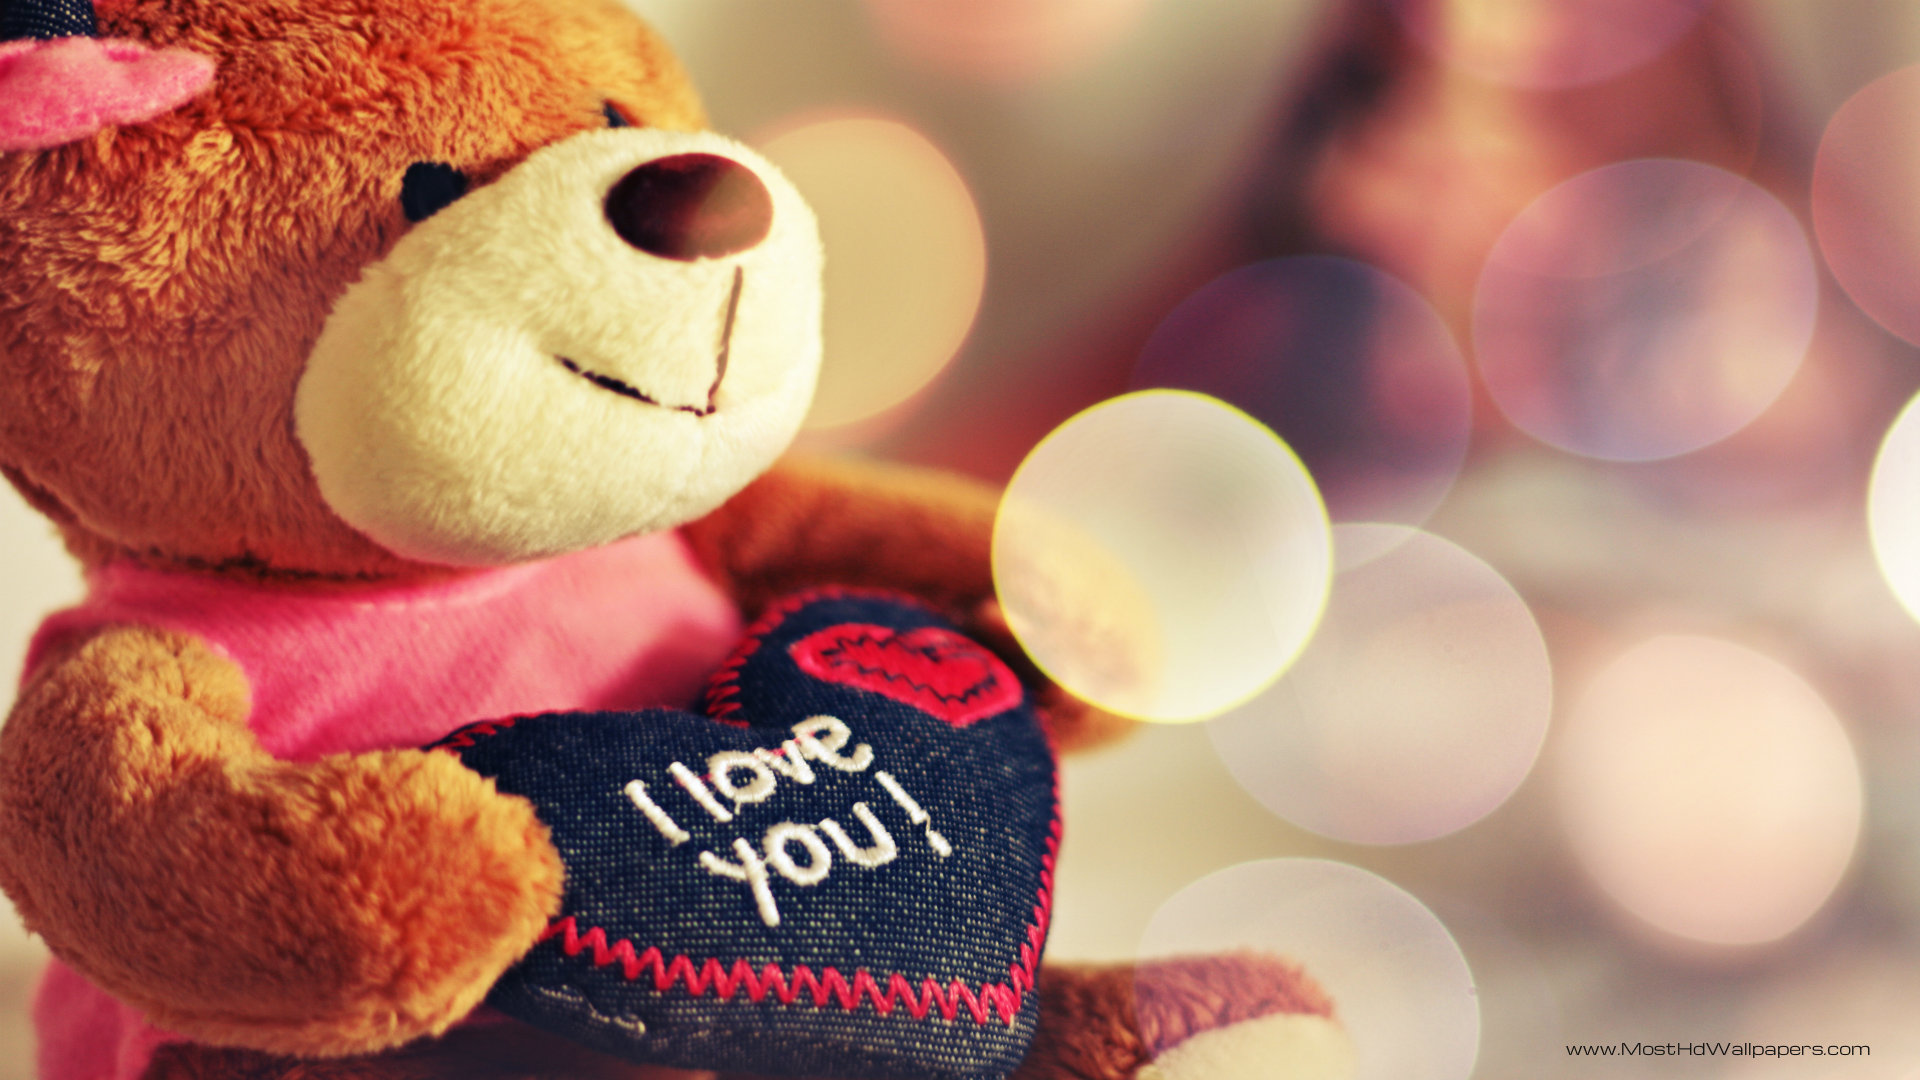 I Love You Widescreen | Most HD Wallpapers Pictures Desktop ...